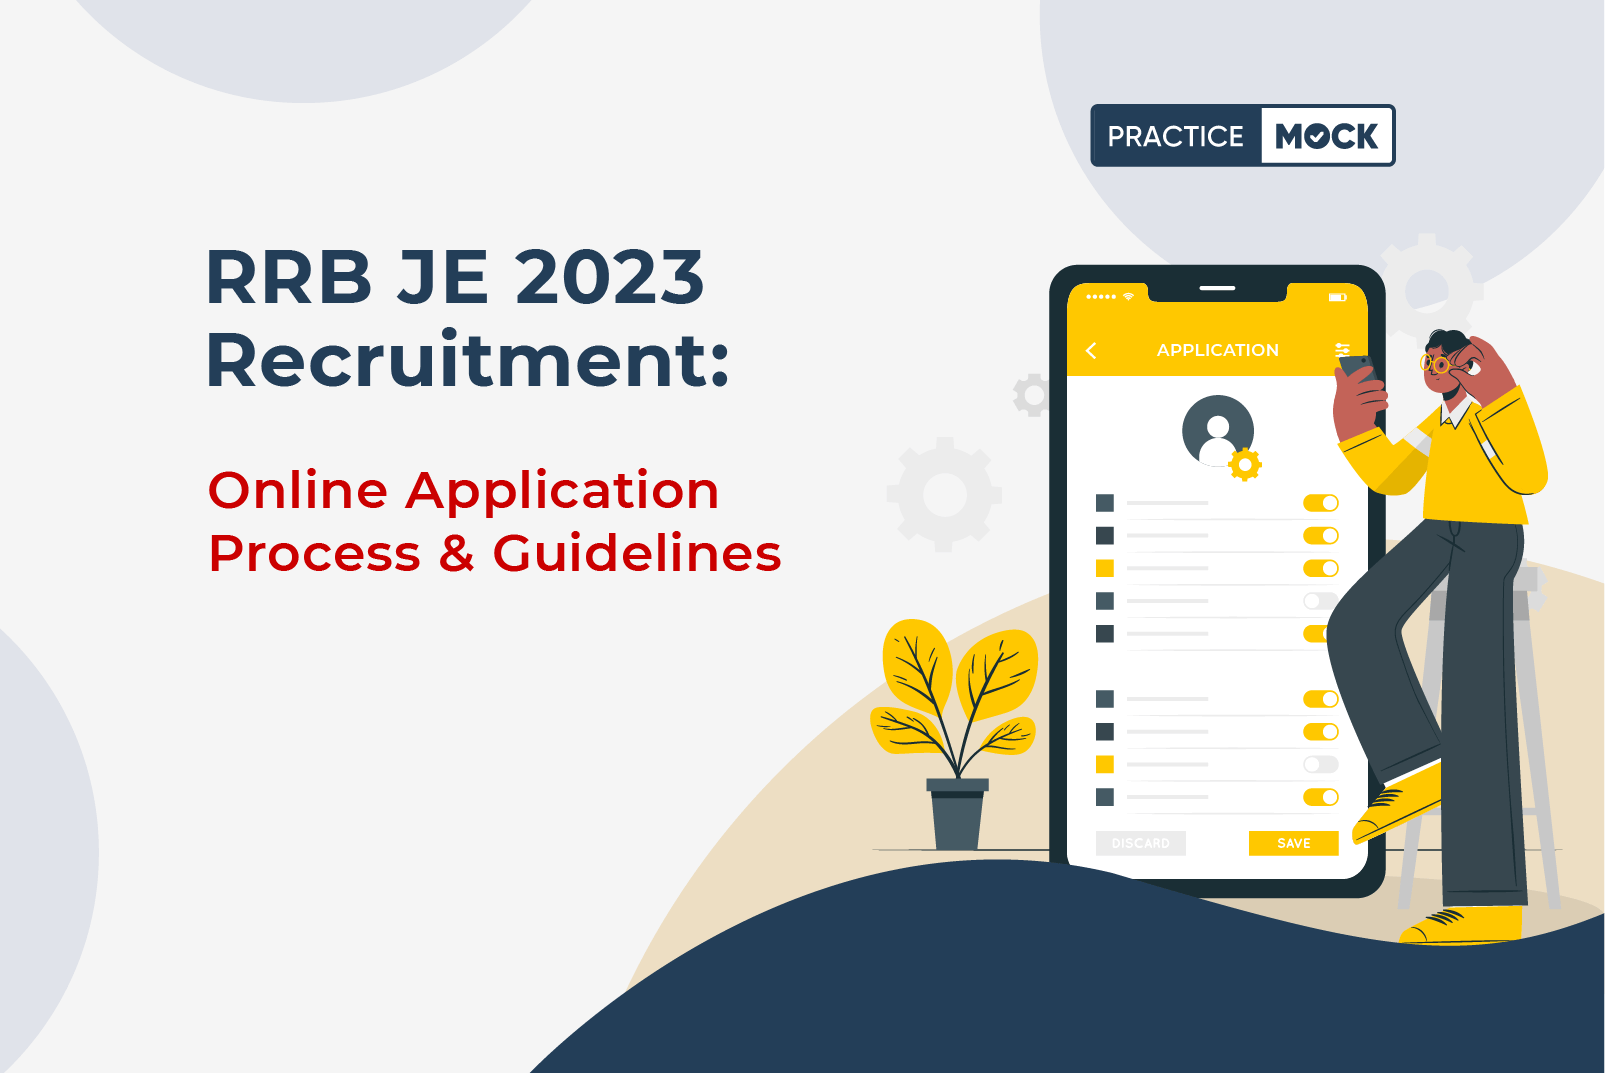 RRB JE Recruitment 2023: Online Application Process and Guidelines